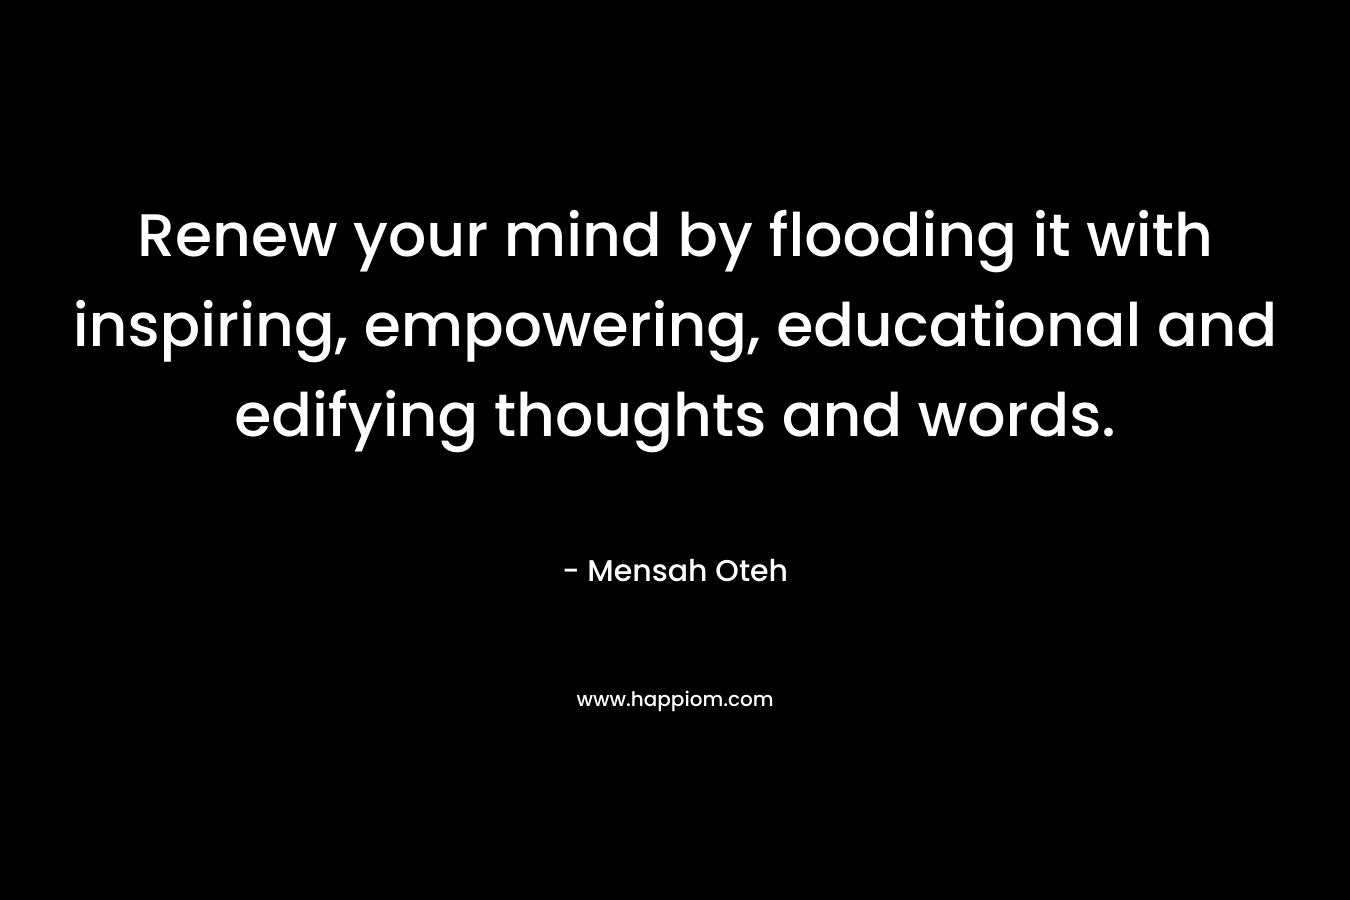 Renew your mind by flooding it with inspiring, empowering, educational and edifying thoughts and words. – Mensah Oteh